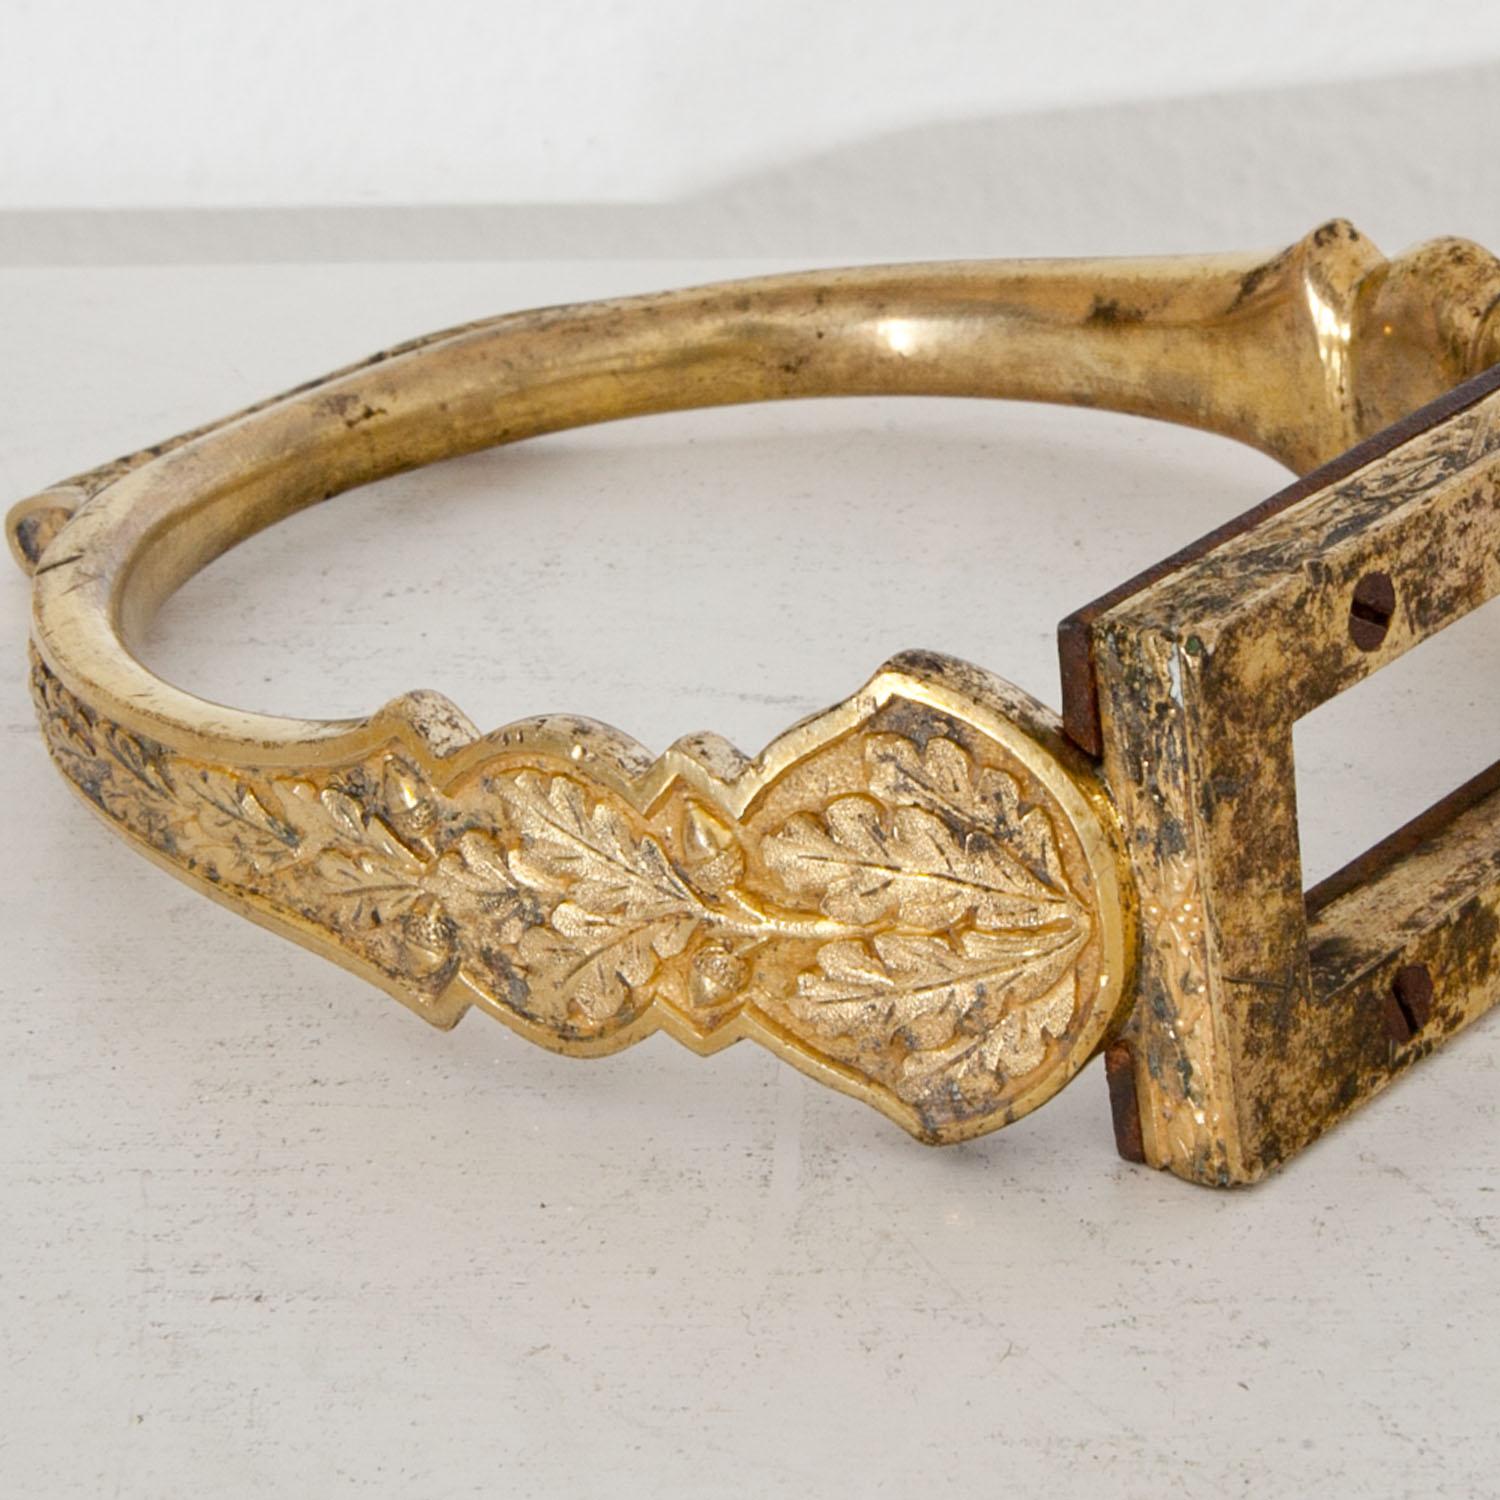 Gilt bronze Stirrup with oak leaves on the arch, ending in a rectangular pierced tread. Very beautiful, can be used as desk dekoration or as paperweight. See similar items: Works of Art from Houghton, Christie’s London 1994, p. 42 and Important